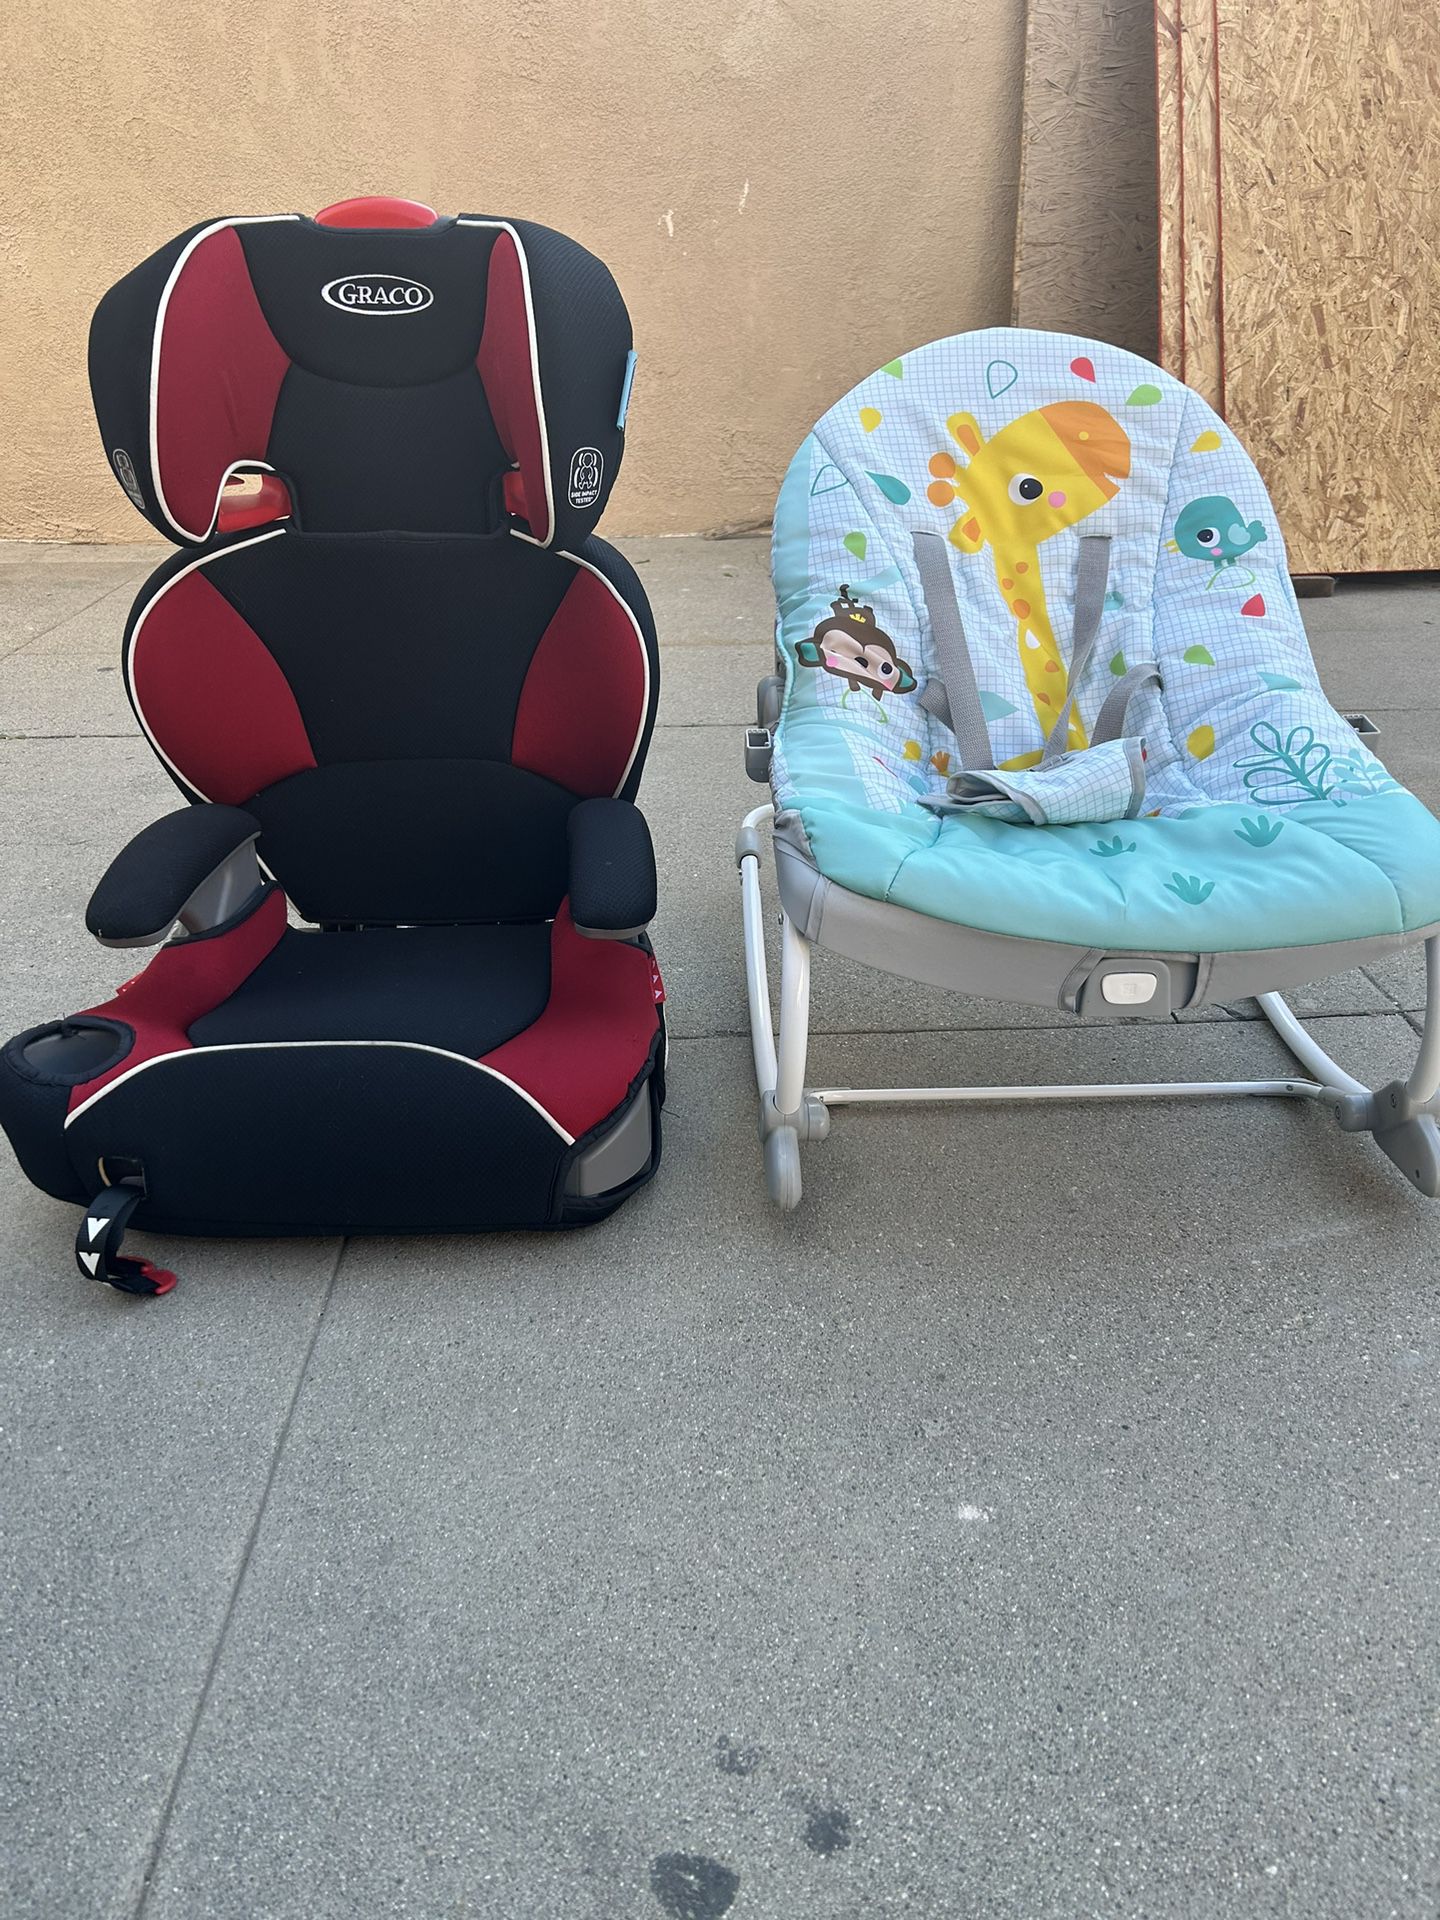 Graco Car Seat And Bouncer 